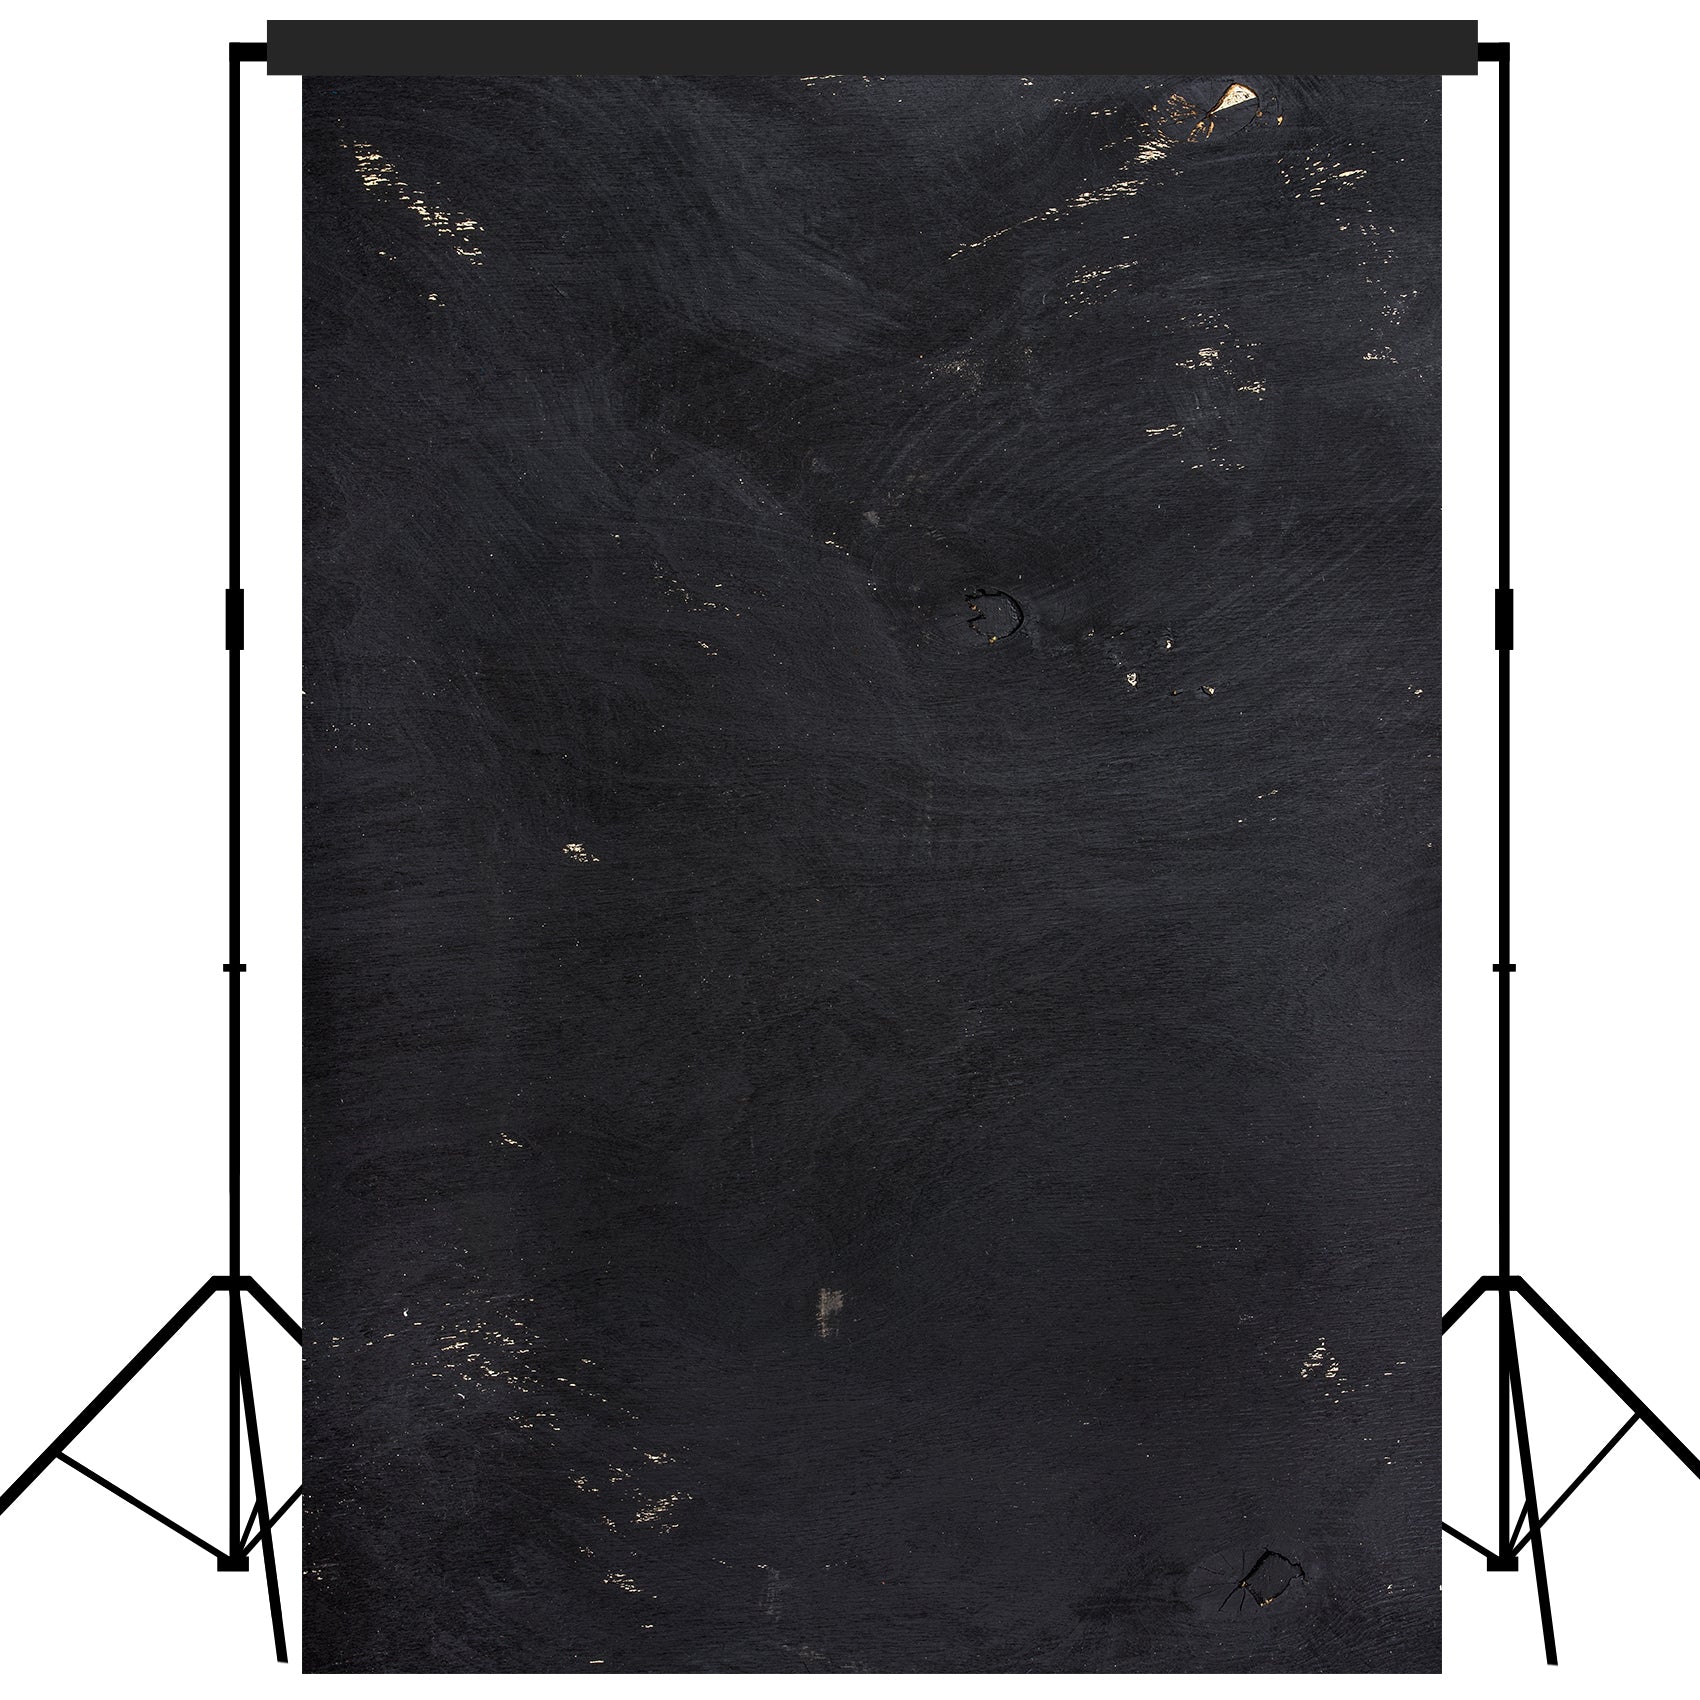 Rustic Distressed Backdrop Photography Background Party 7x5feet #1806